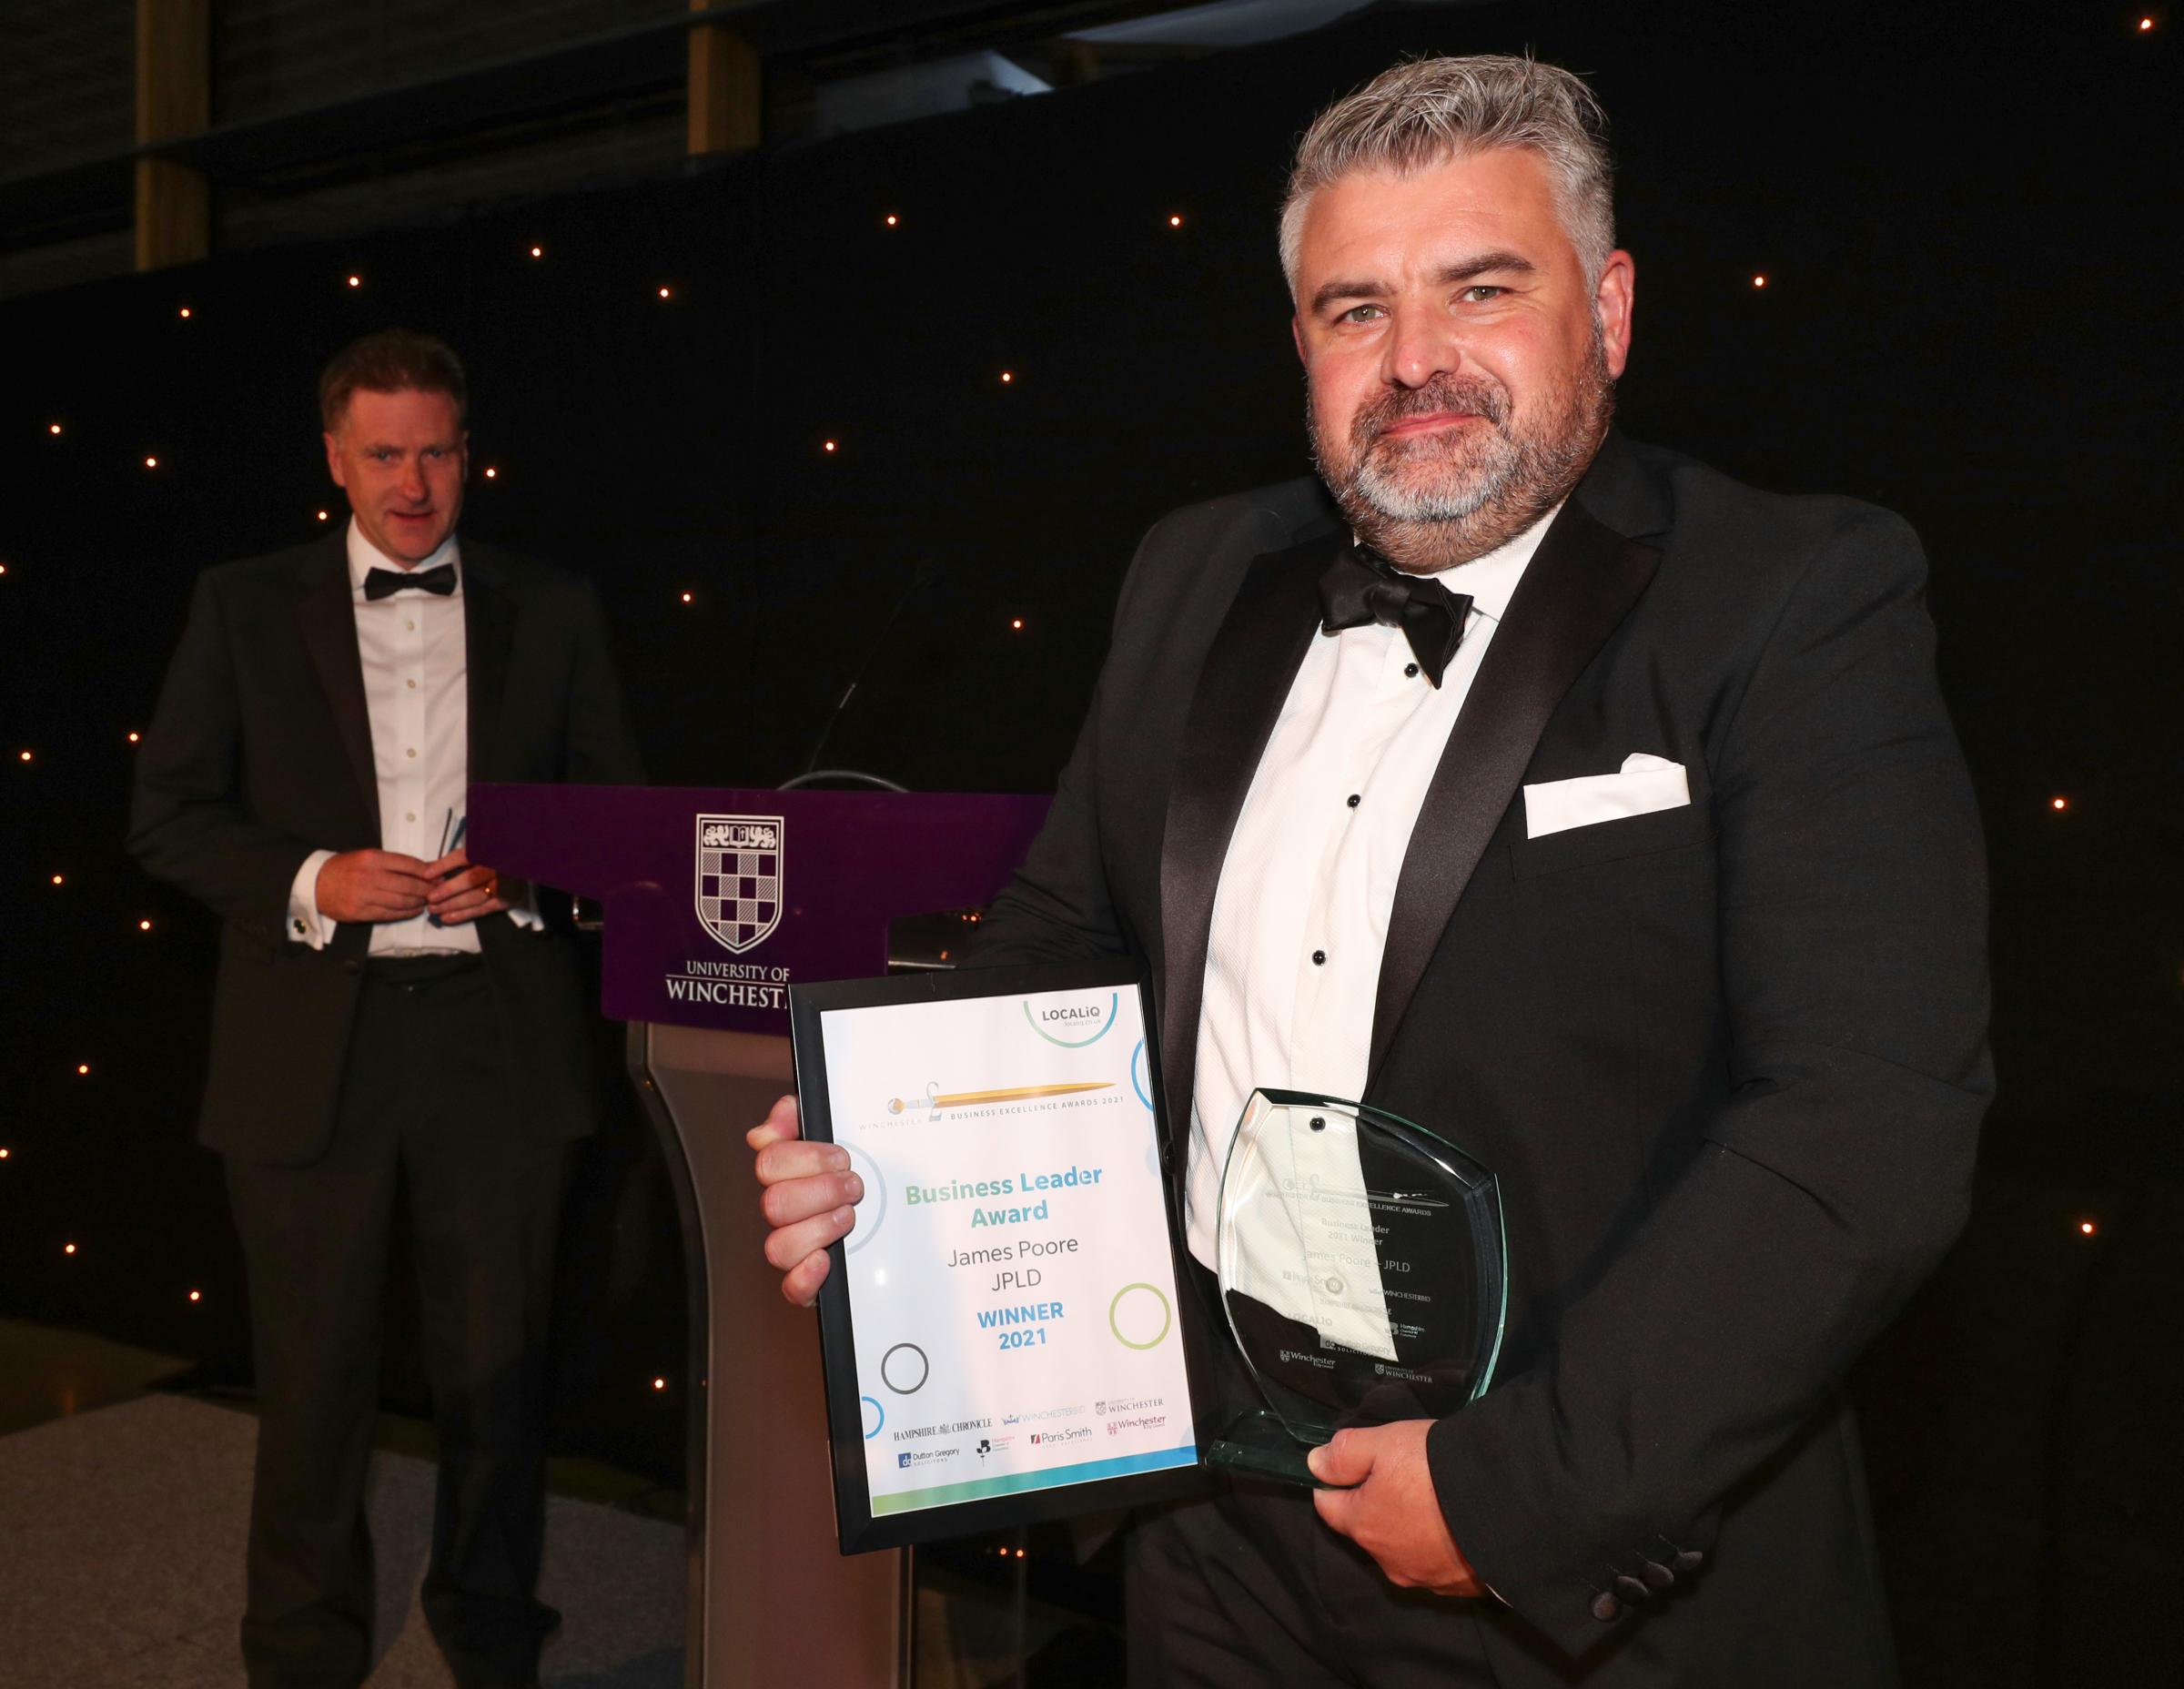 Winchester Business Excellence Awards 2021. Winner of the Business Leader Award James Poore – JPLD